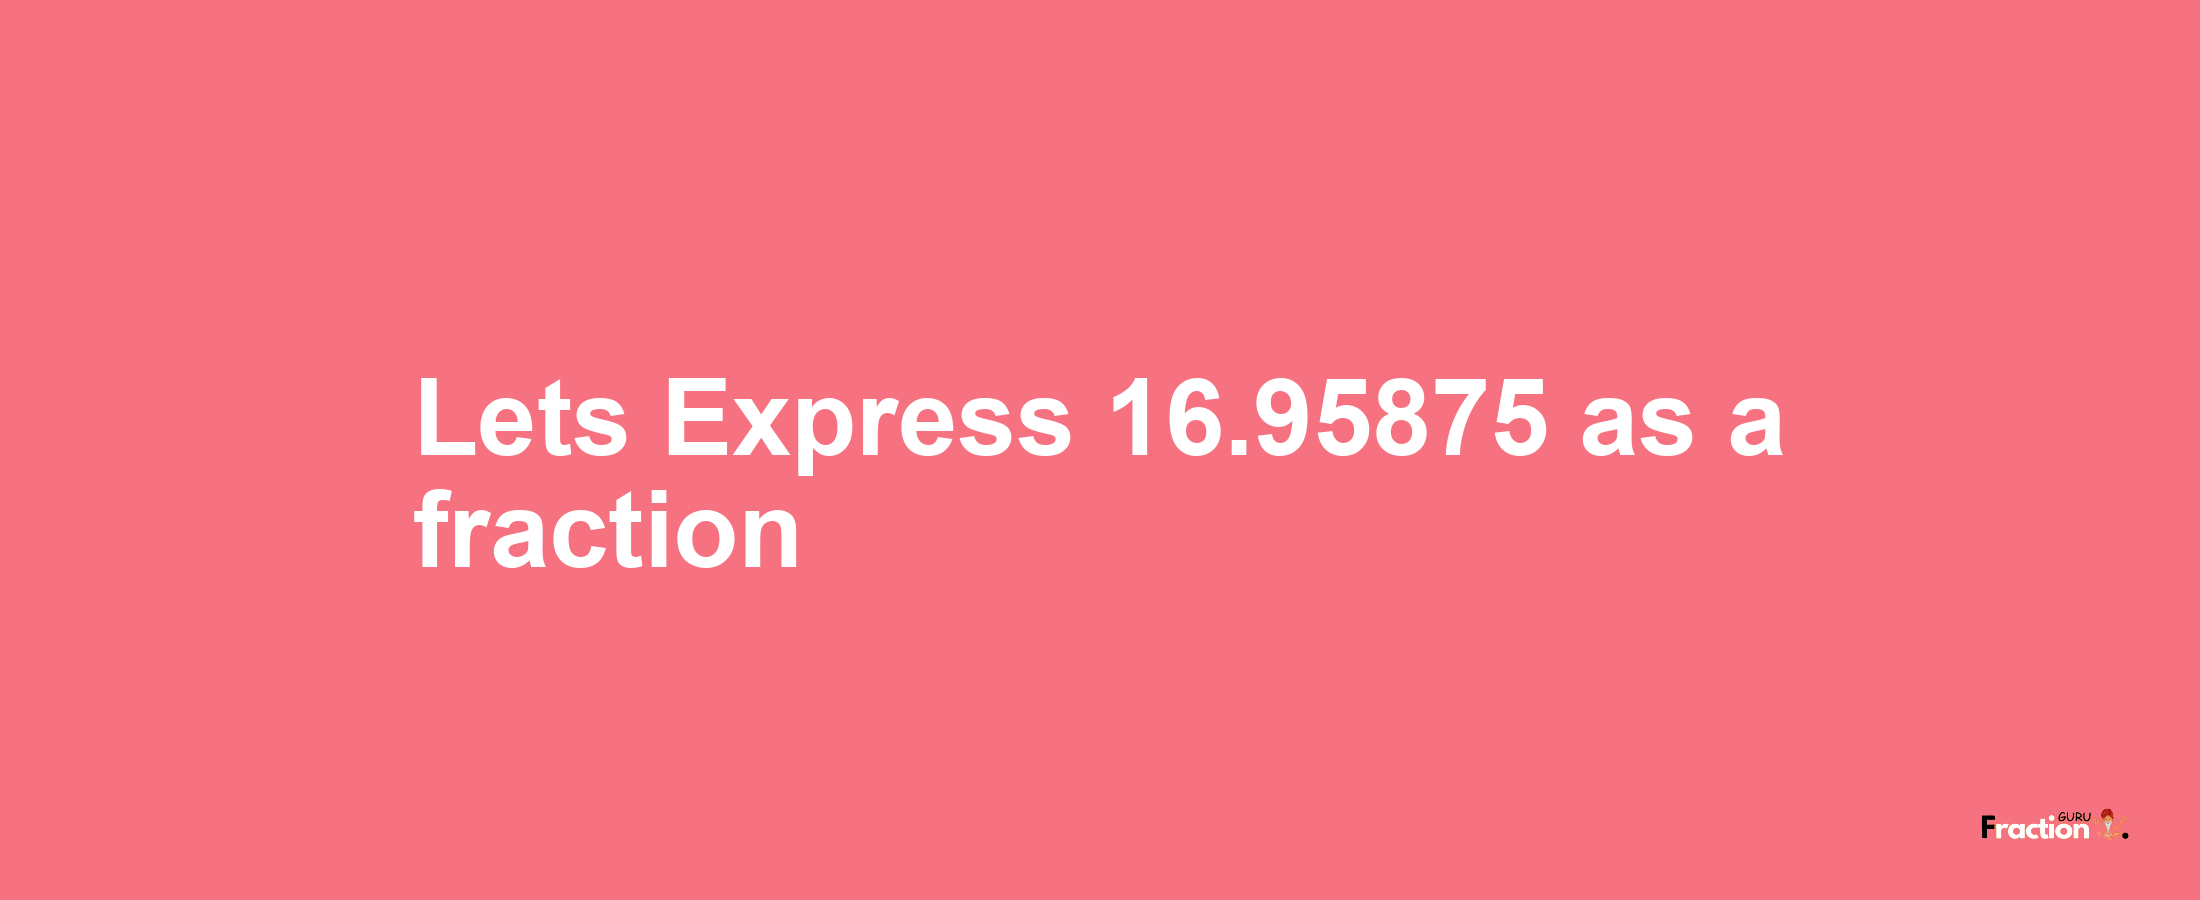 Lets Express 16.95875 as afraction